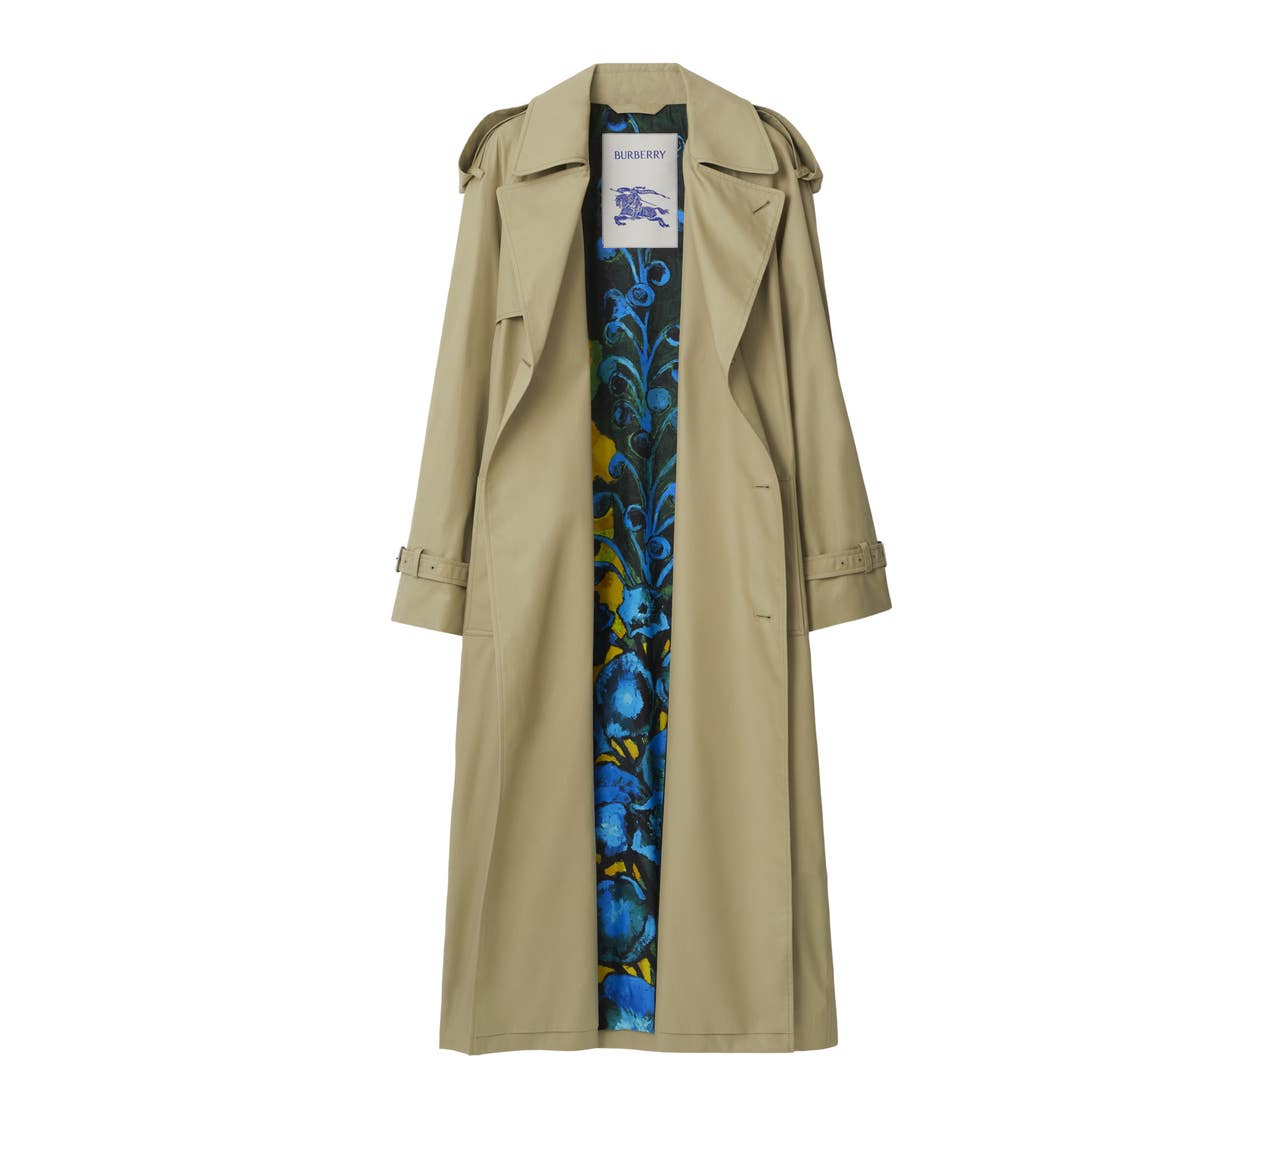 King’s favourite flower lines Burberry trench coat after Highgrove ...